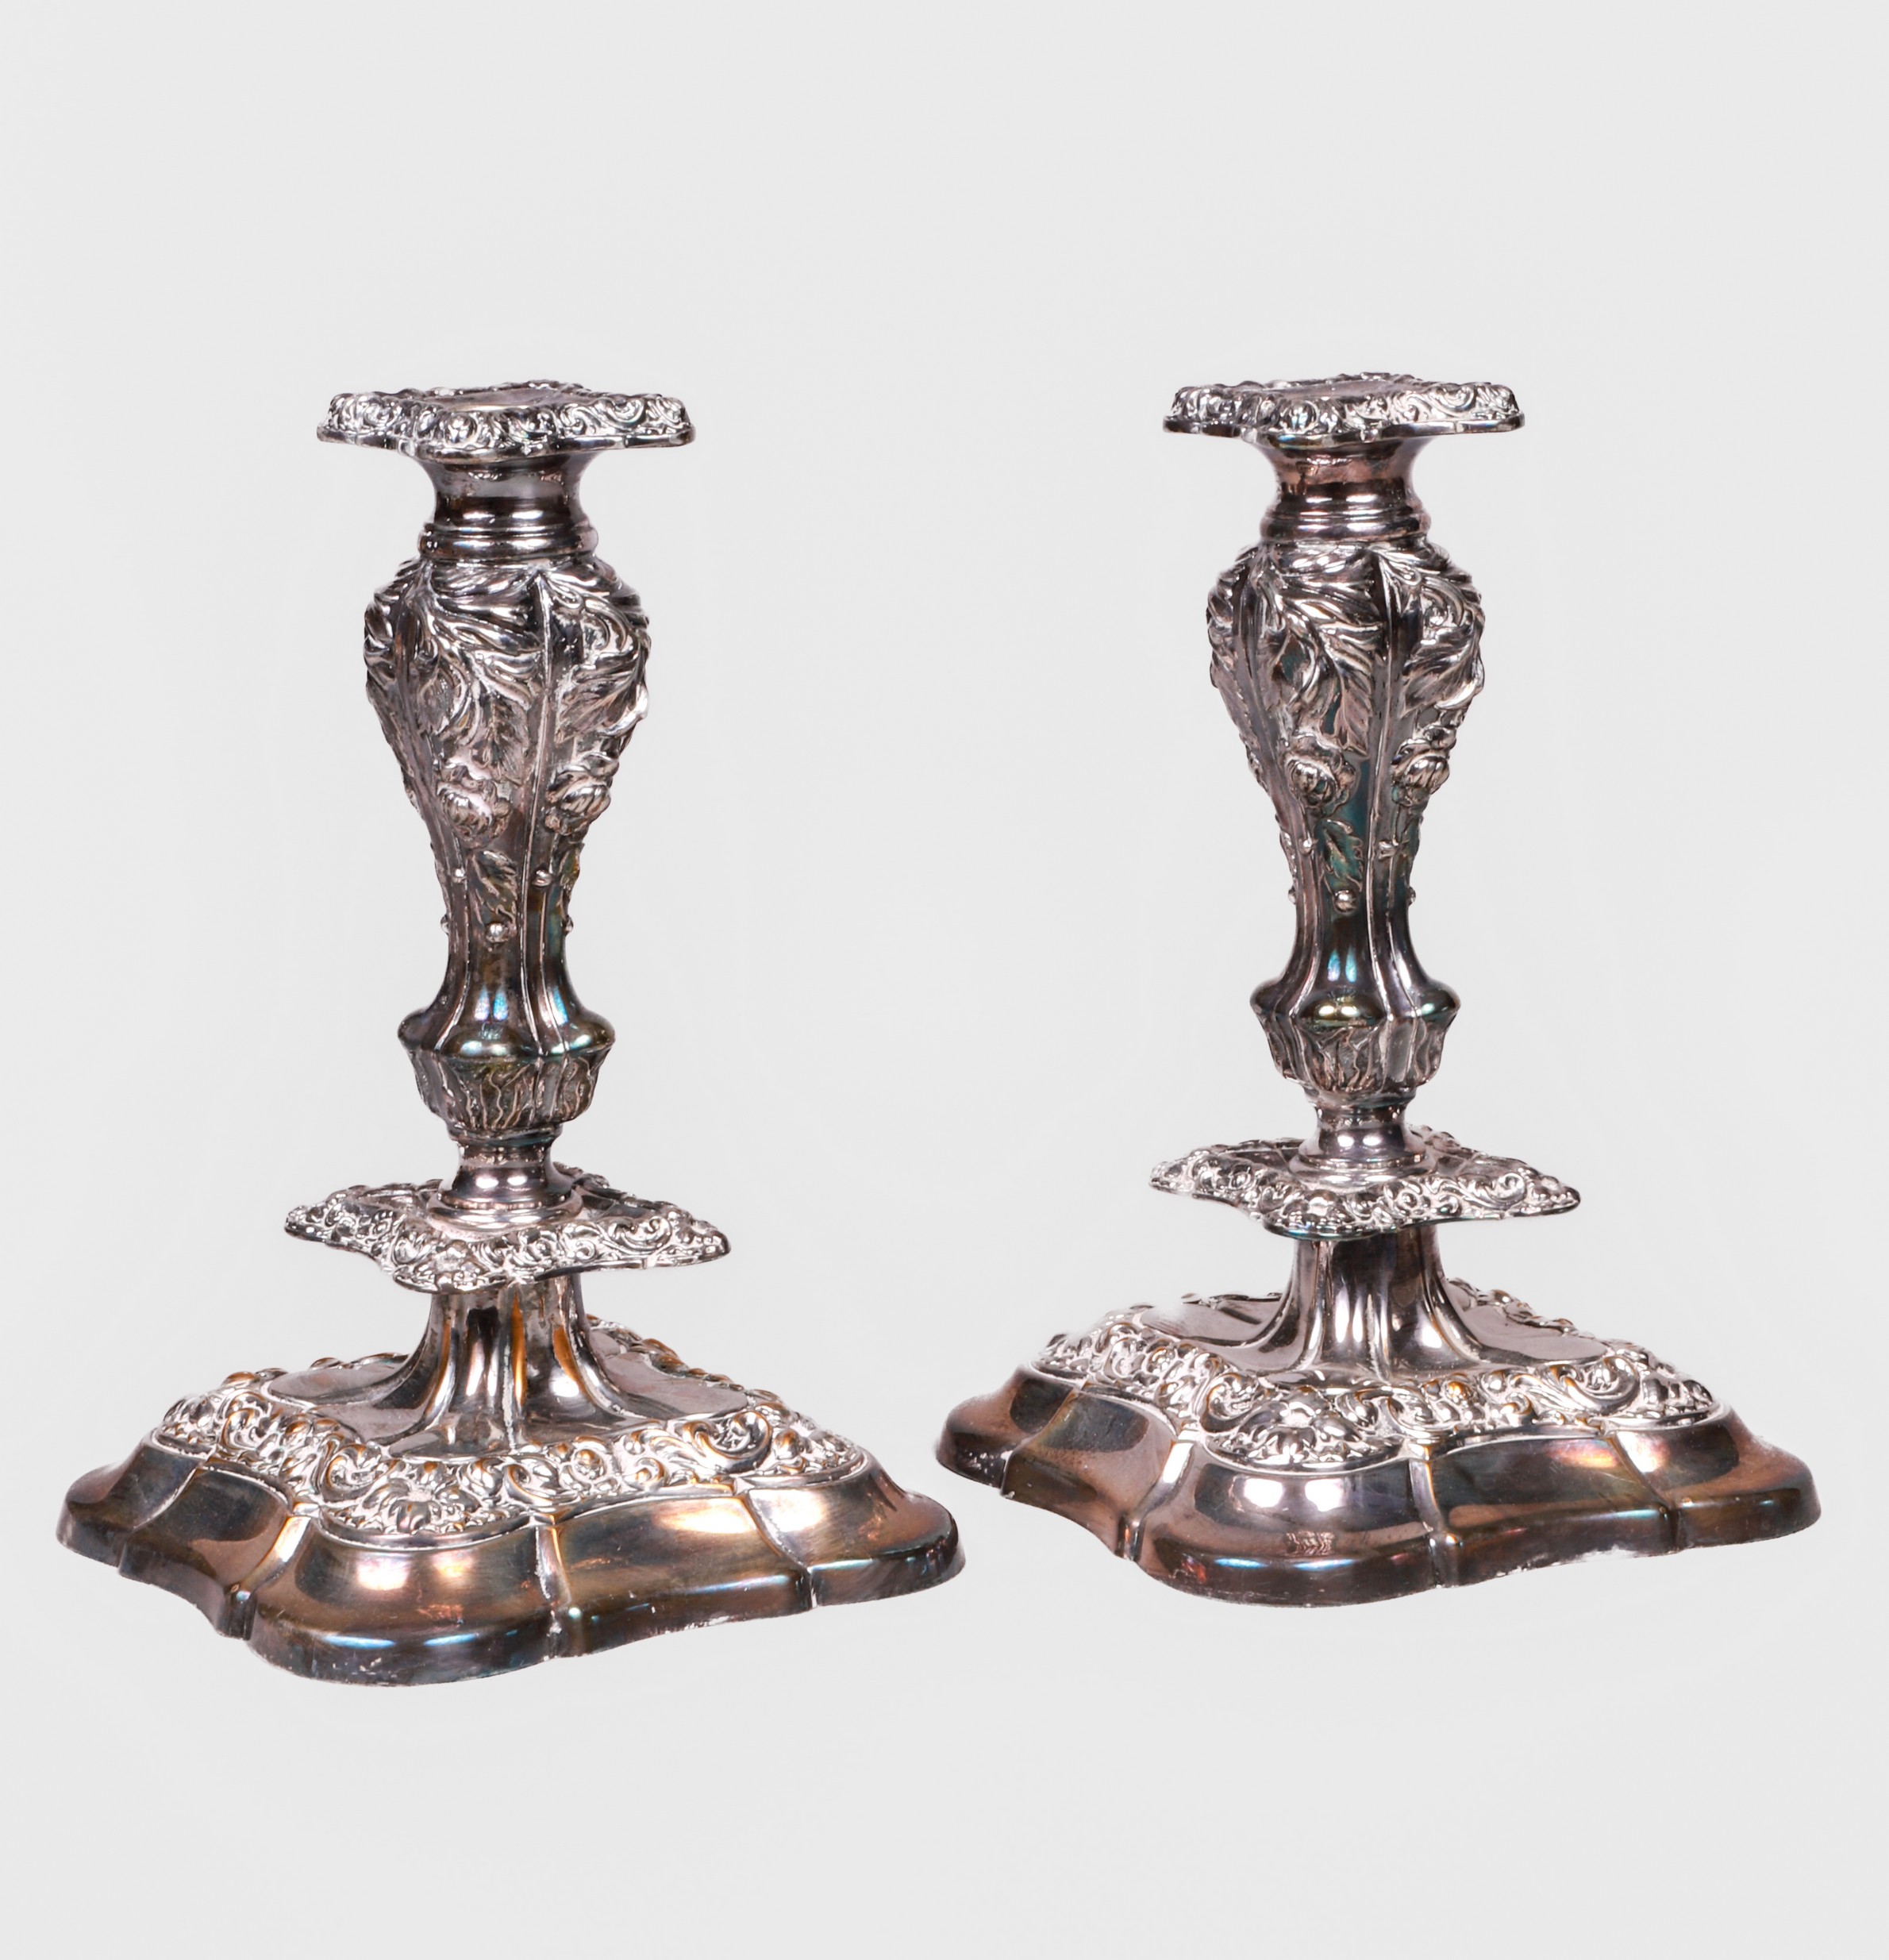 GGW&S Repousse plate candlesticks, in